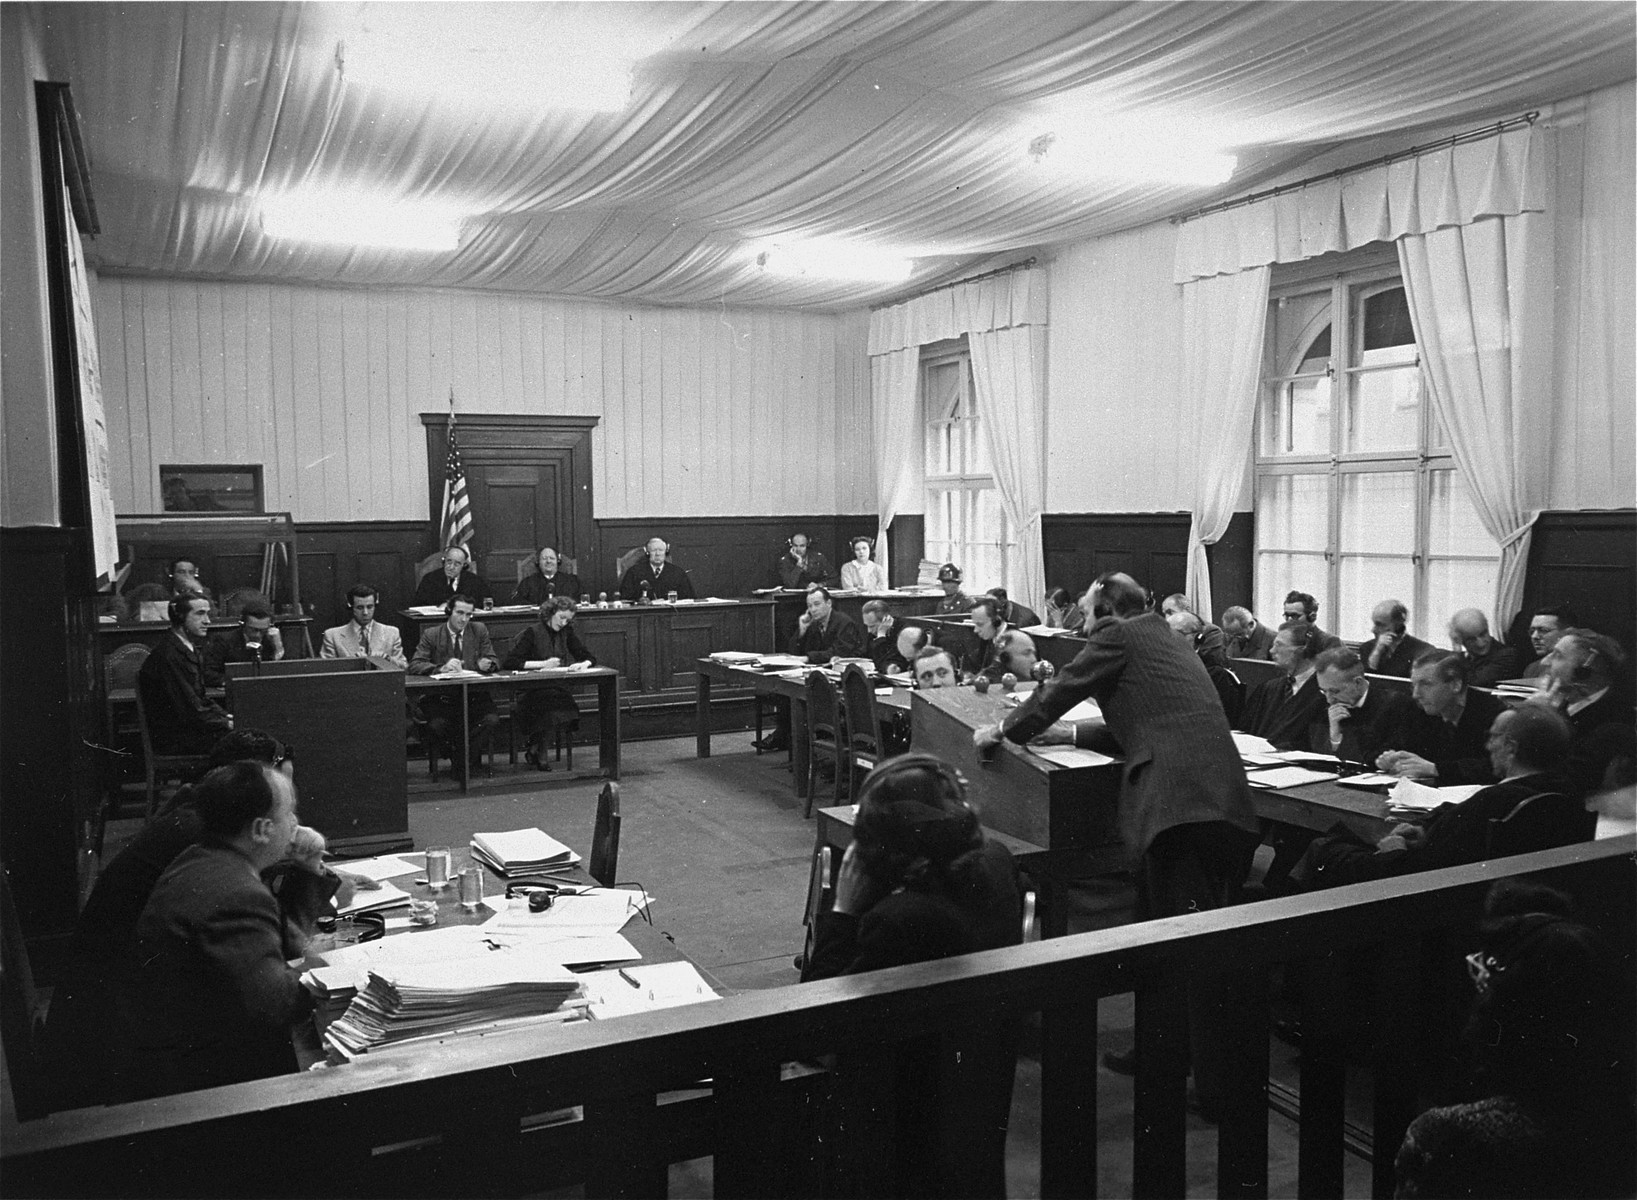 The proceedings of the RuSHA Trial in Courtroom #6 in the Palace of Justice.  

In the back sits Military Tribunal I, to the right is the defendants' dock, and in front are the lawyers.  Sitting below the middle judge of the Tribunal is Vivien Putty Spitz, a court reporterr.